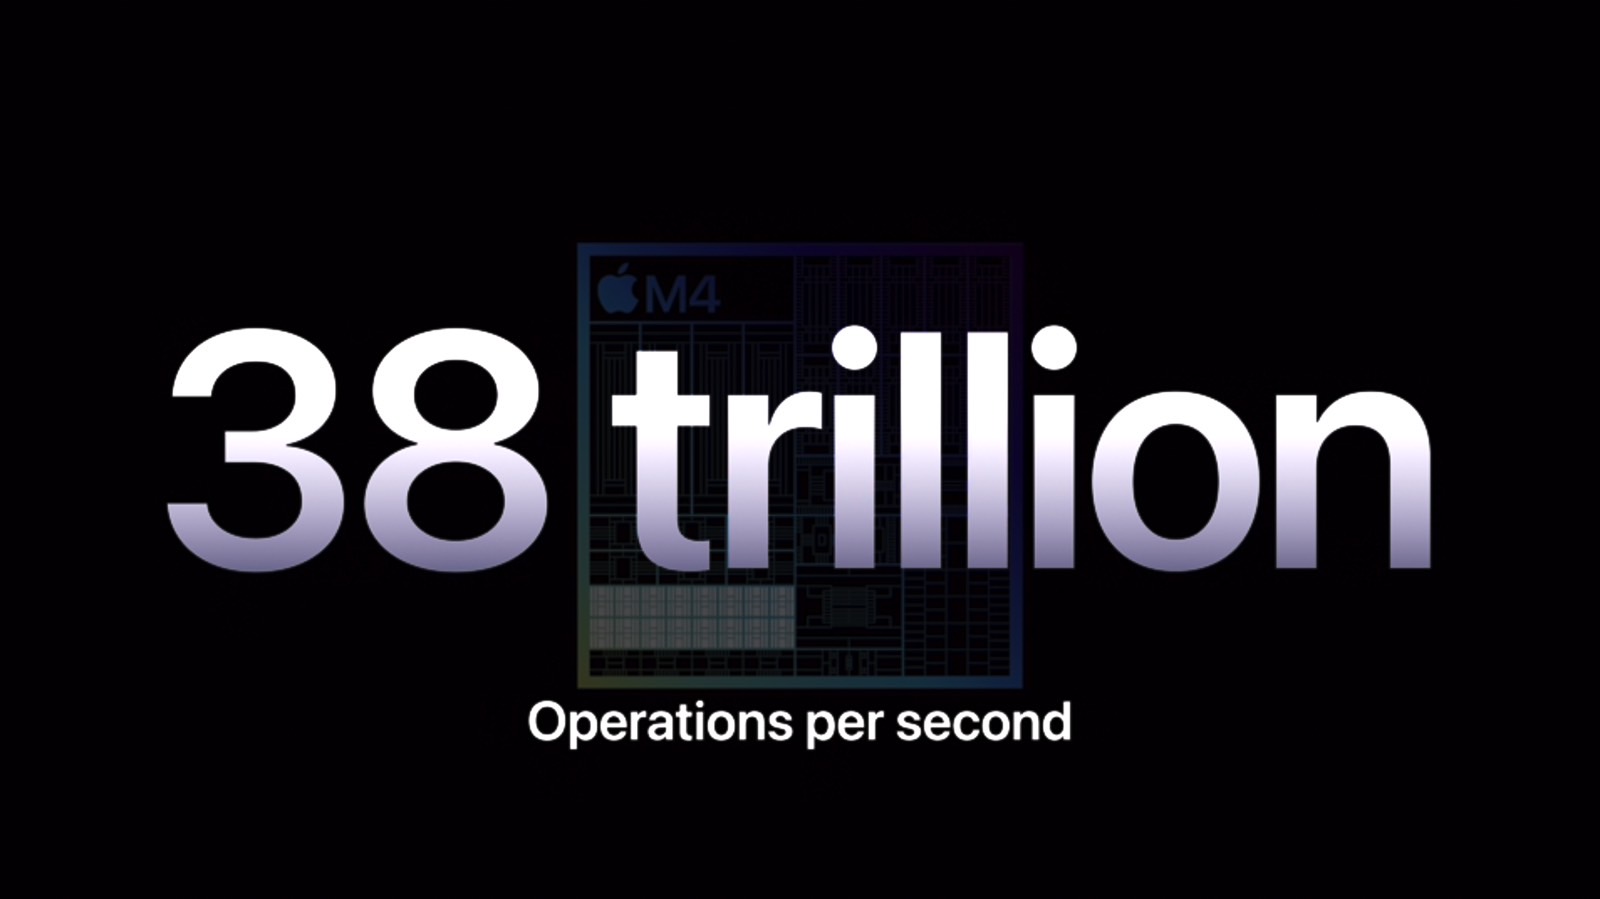 The Neural Engine in the M4 iPad Pro reaches 38 trillion operations per second.